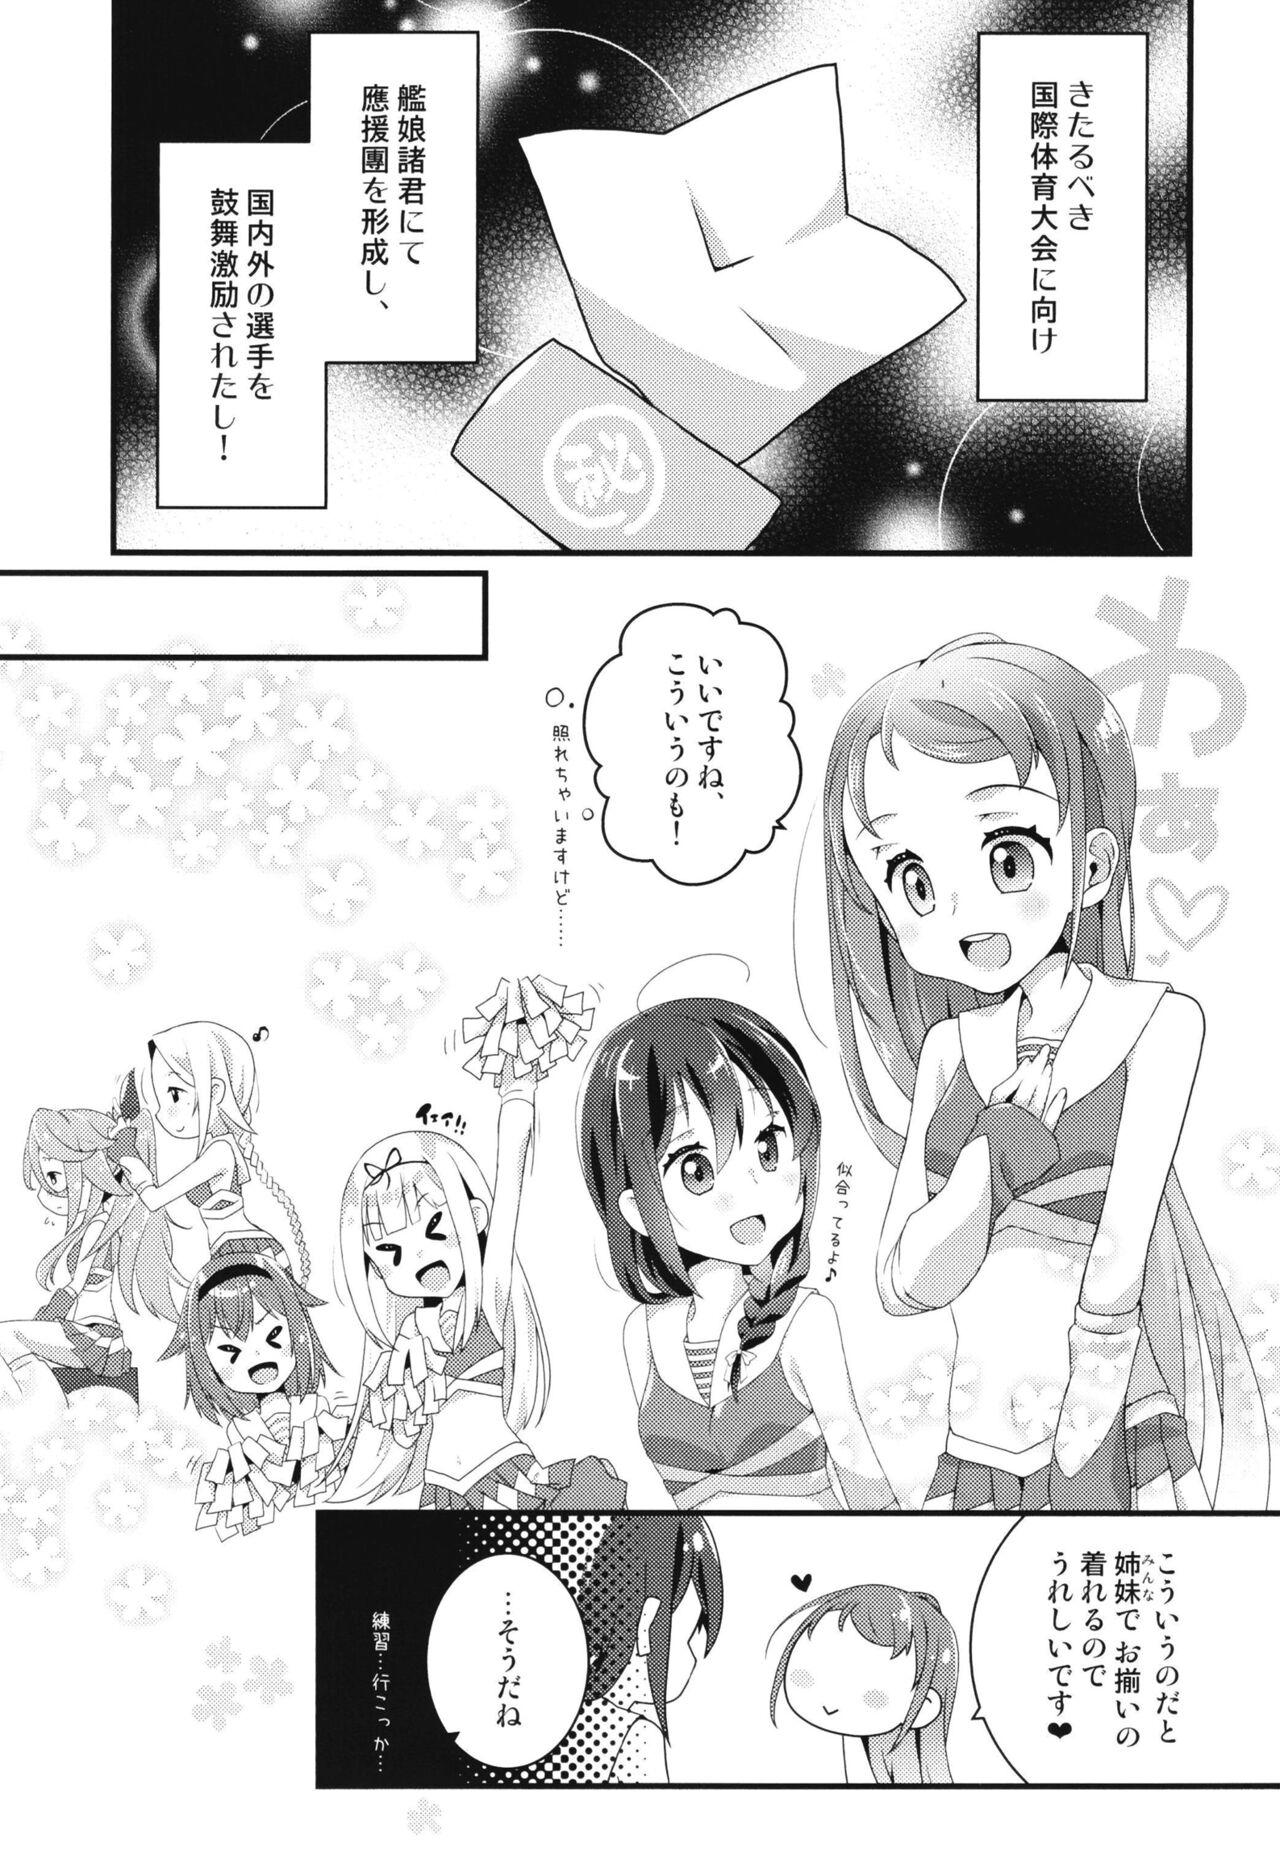 Action Yah! Cheer! yeah! - Kantai collection Amateurs Gone Wild - Page 3